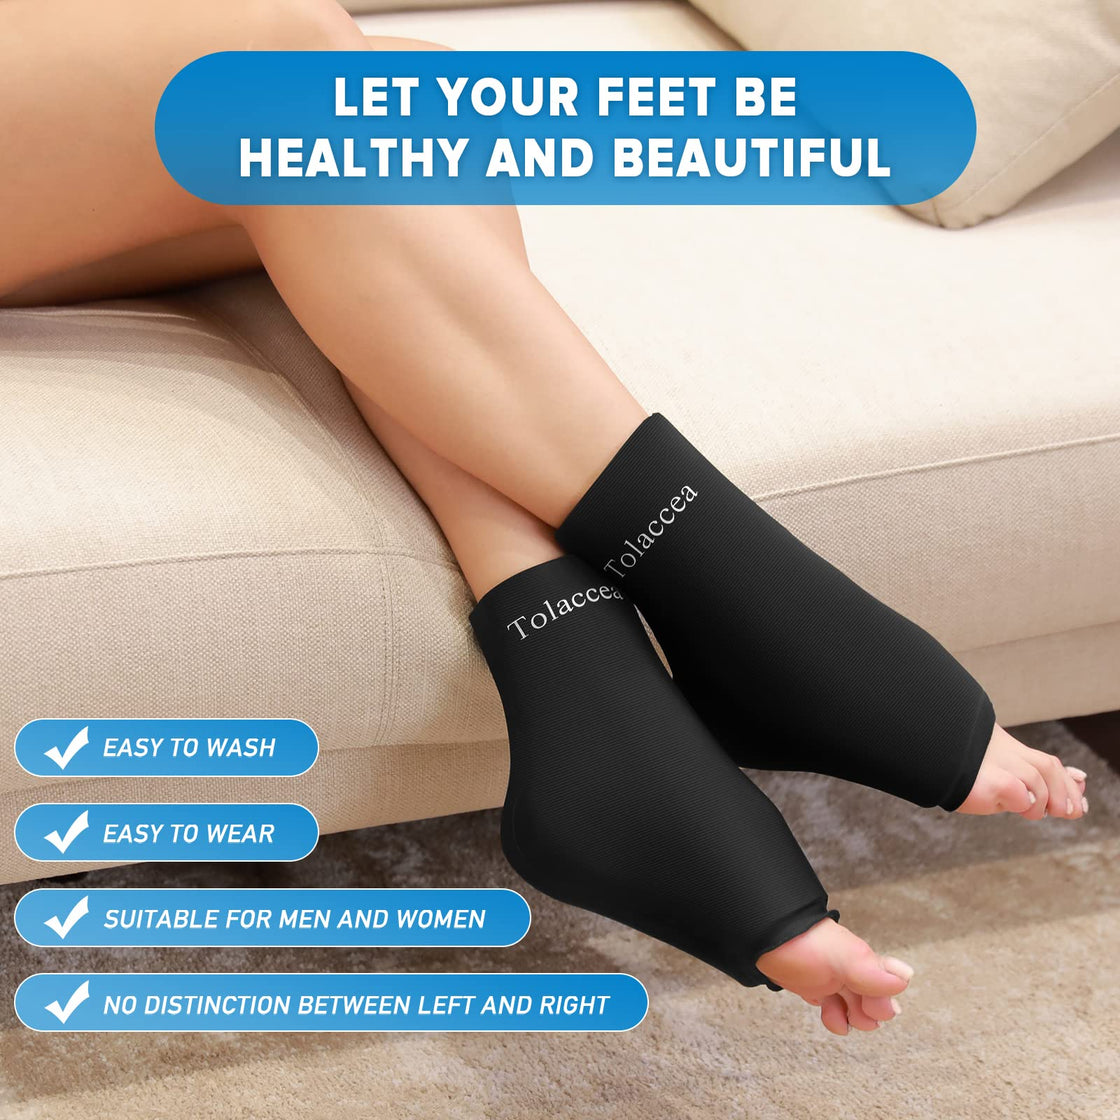 Ankle Foot Ice Pack Wrap for Injuries, Reusable Gel Ice Pack for Hot and Cold Therapies, Flexible Cold Pack